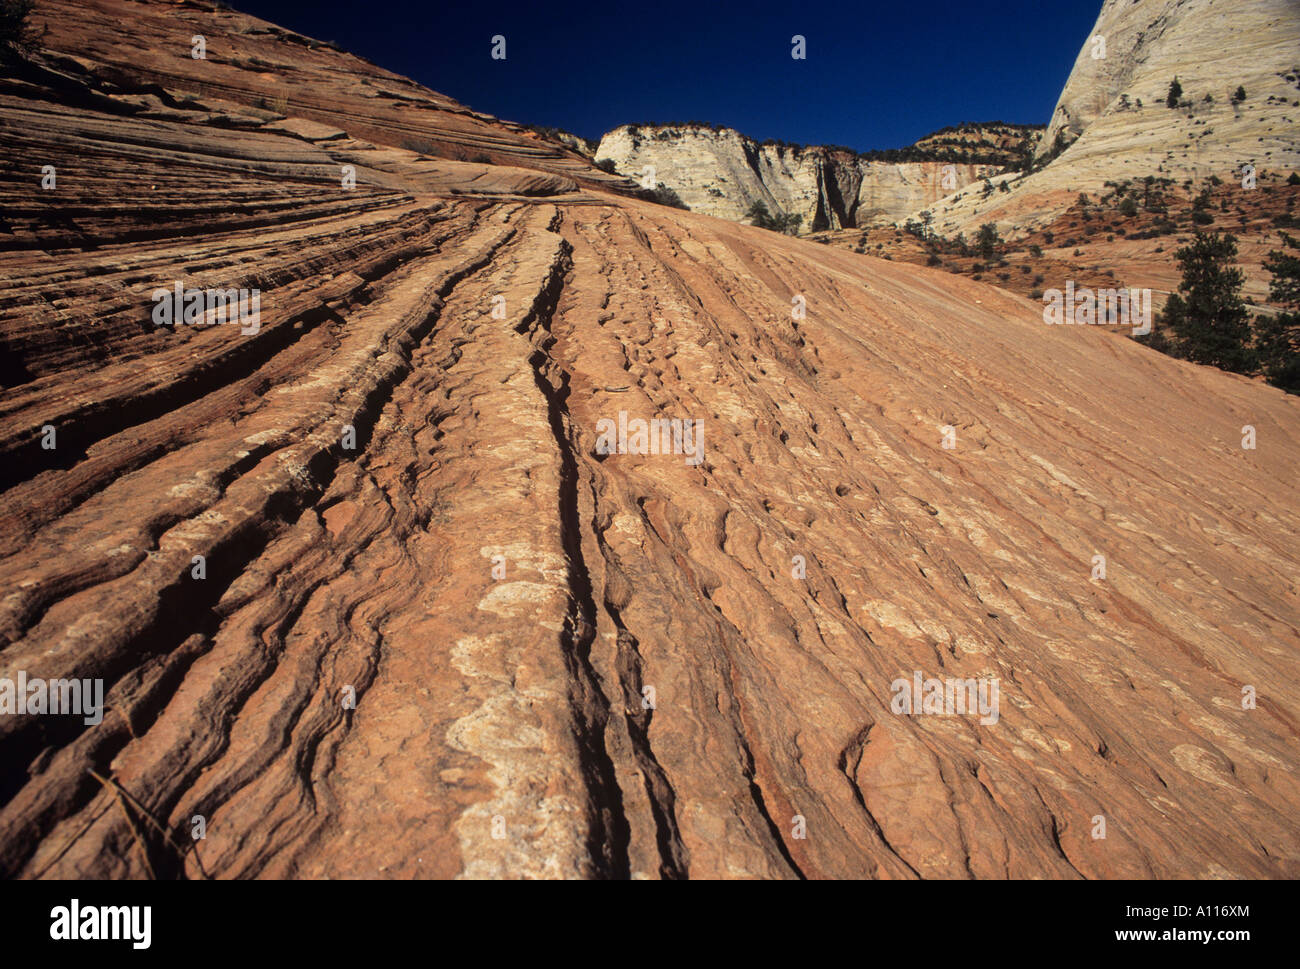 The result of millions of years of receding oceans and constant erosion detail of the striations in the deep red rock on a hillside of the Navajo sandstone terrain of the Zion National Park Stock Photo